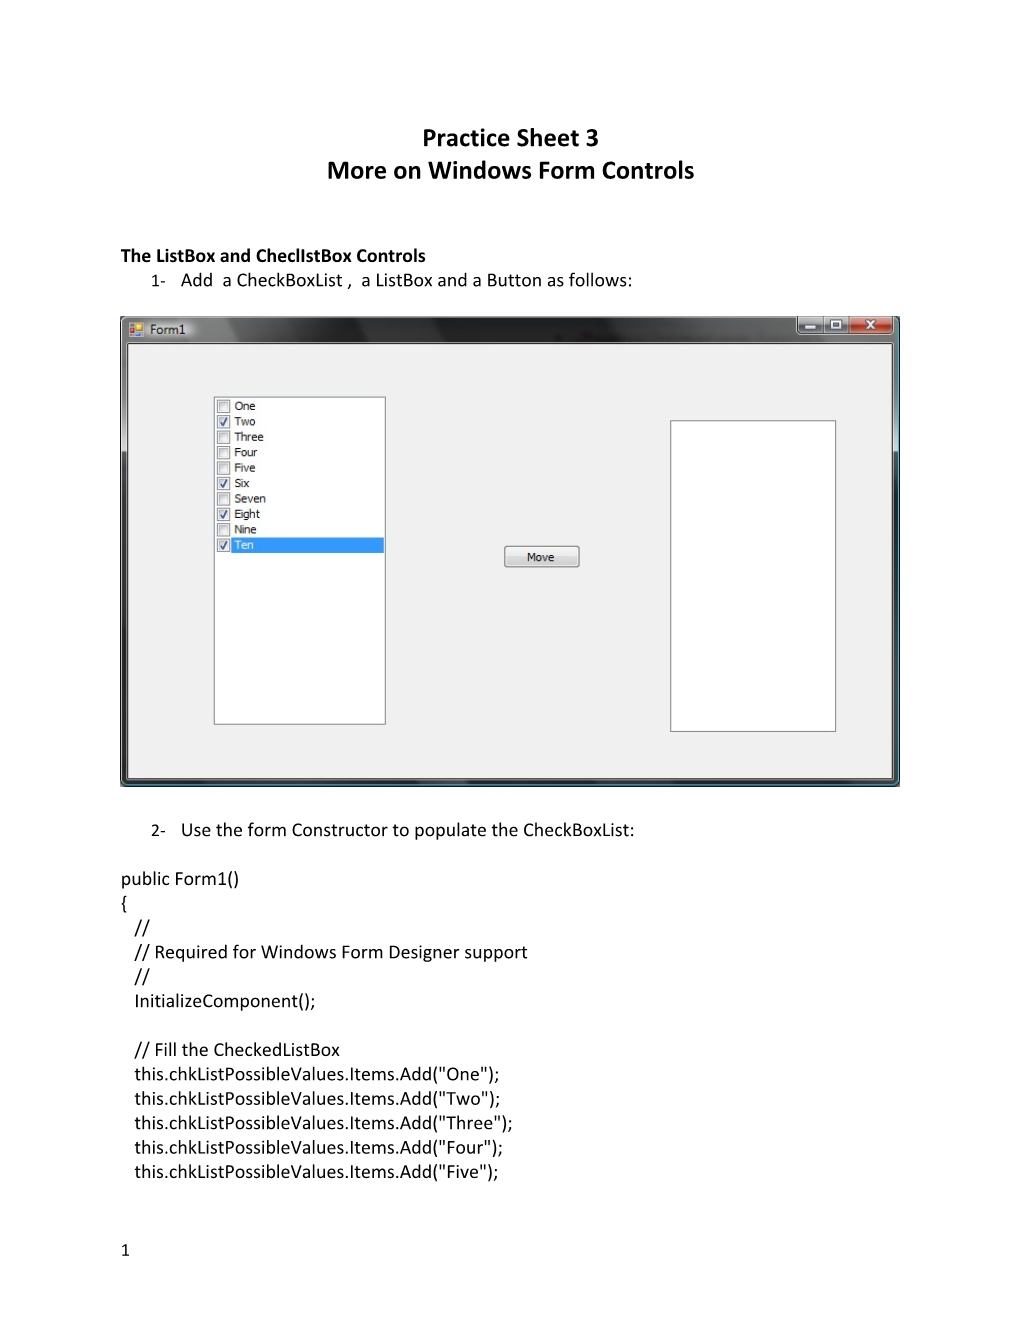 More on Windows Form Controls